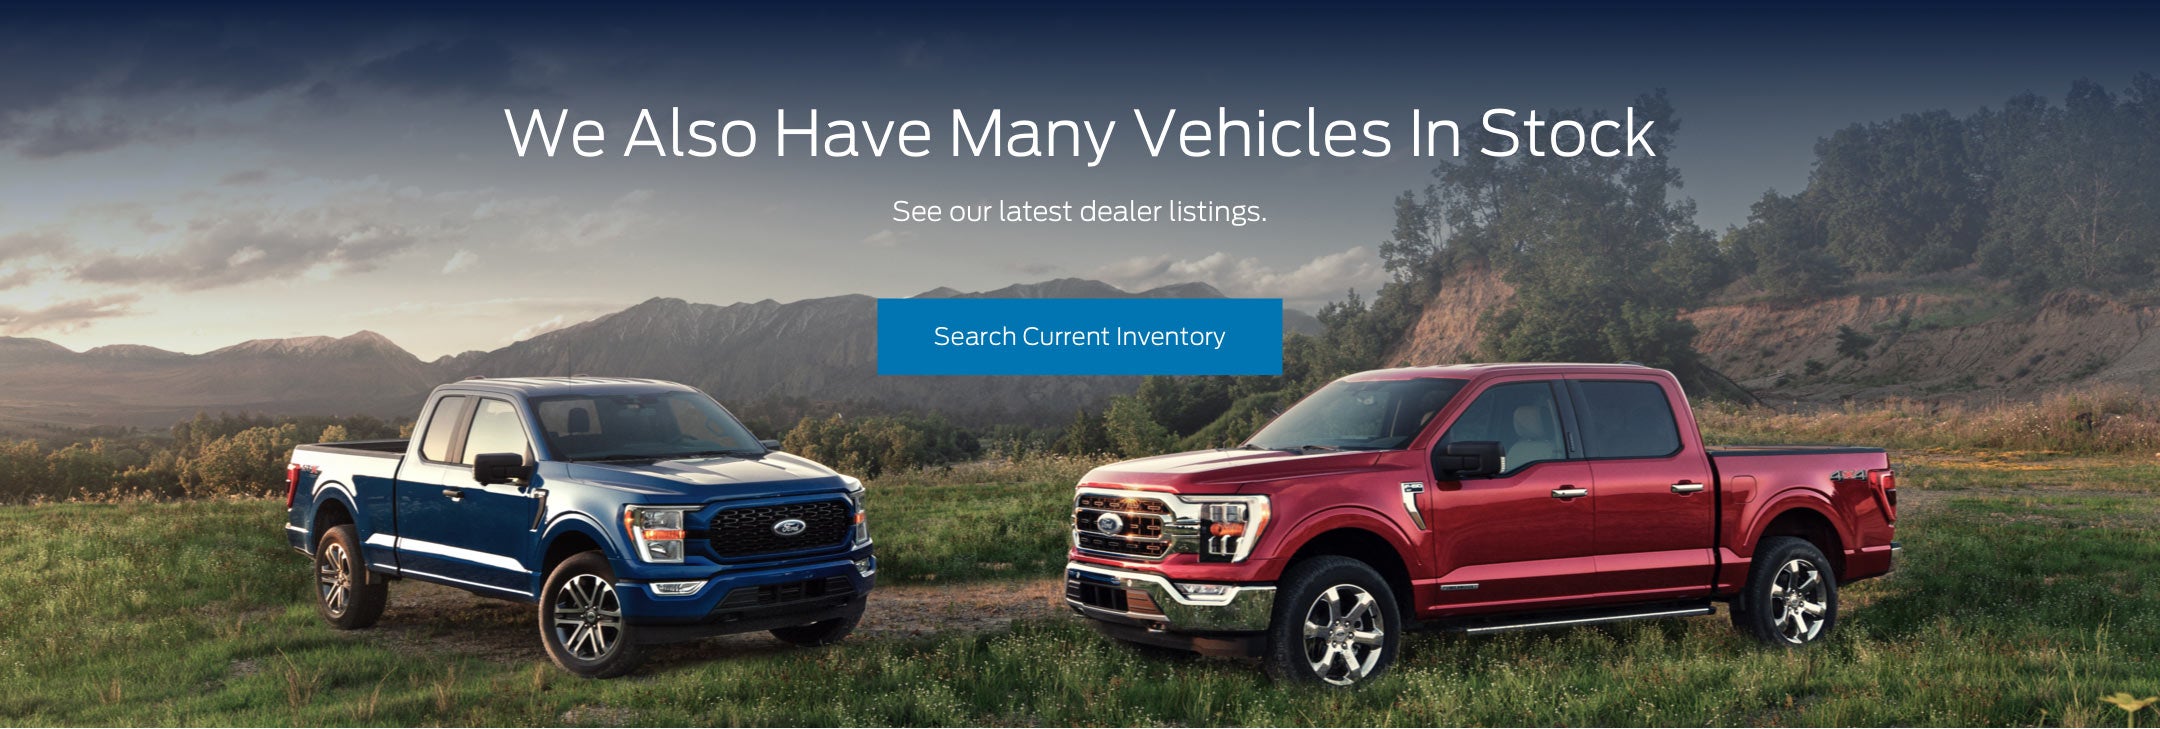 Ford vehicles in stock | Fernelius Ford, Inc. in Cheboygan MI